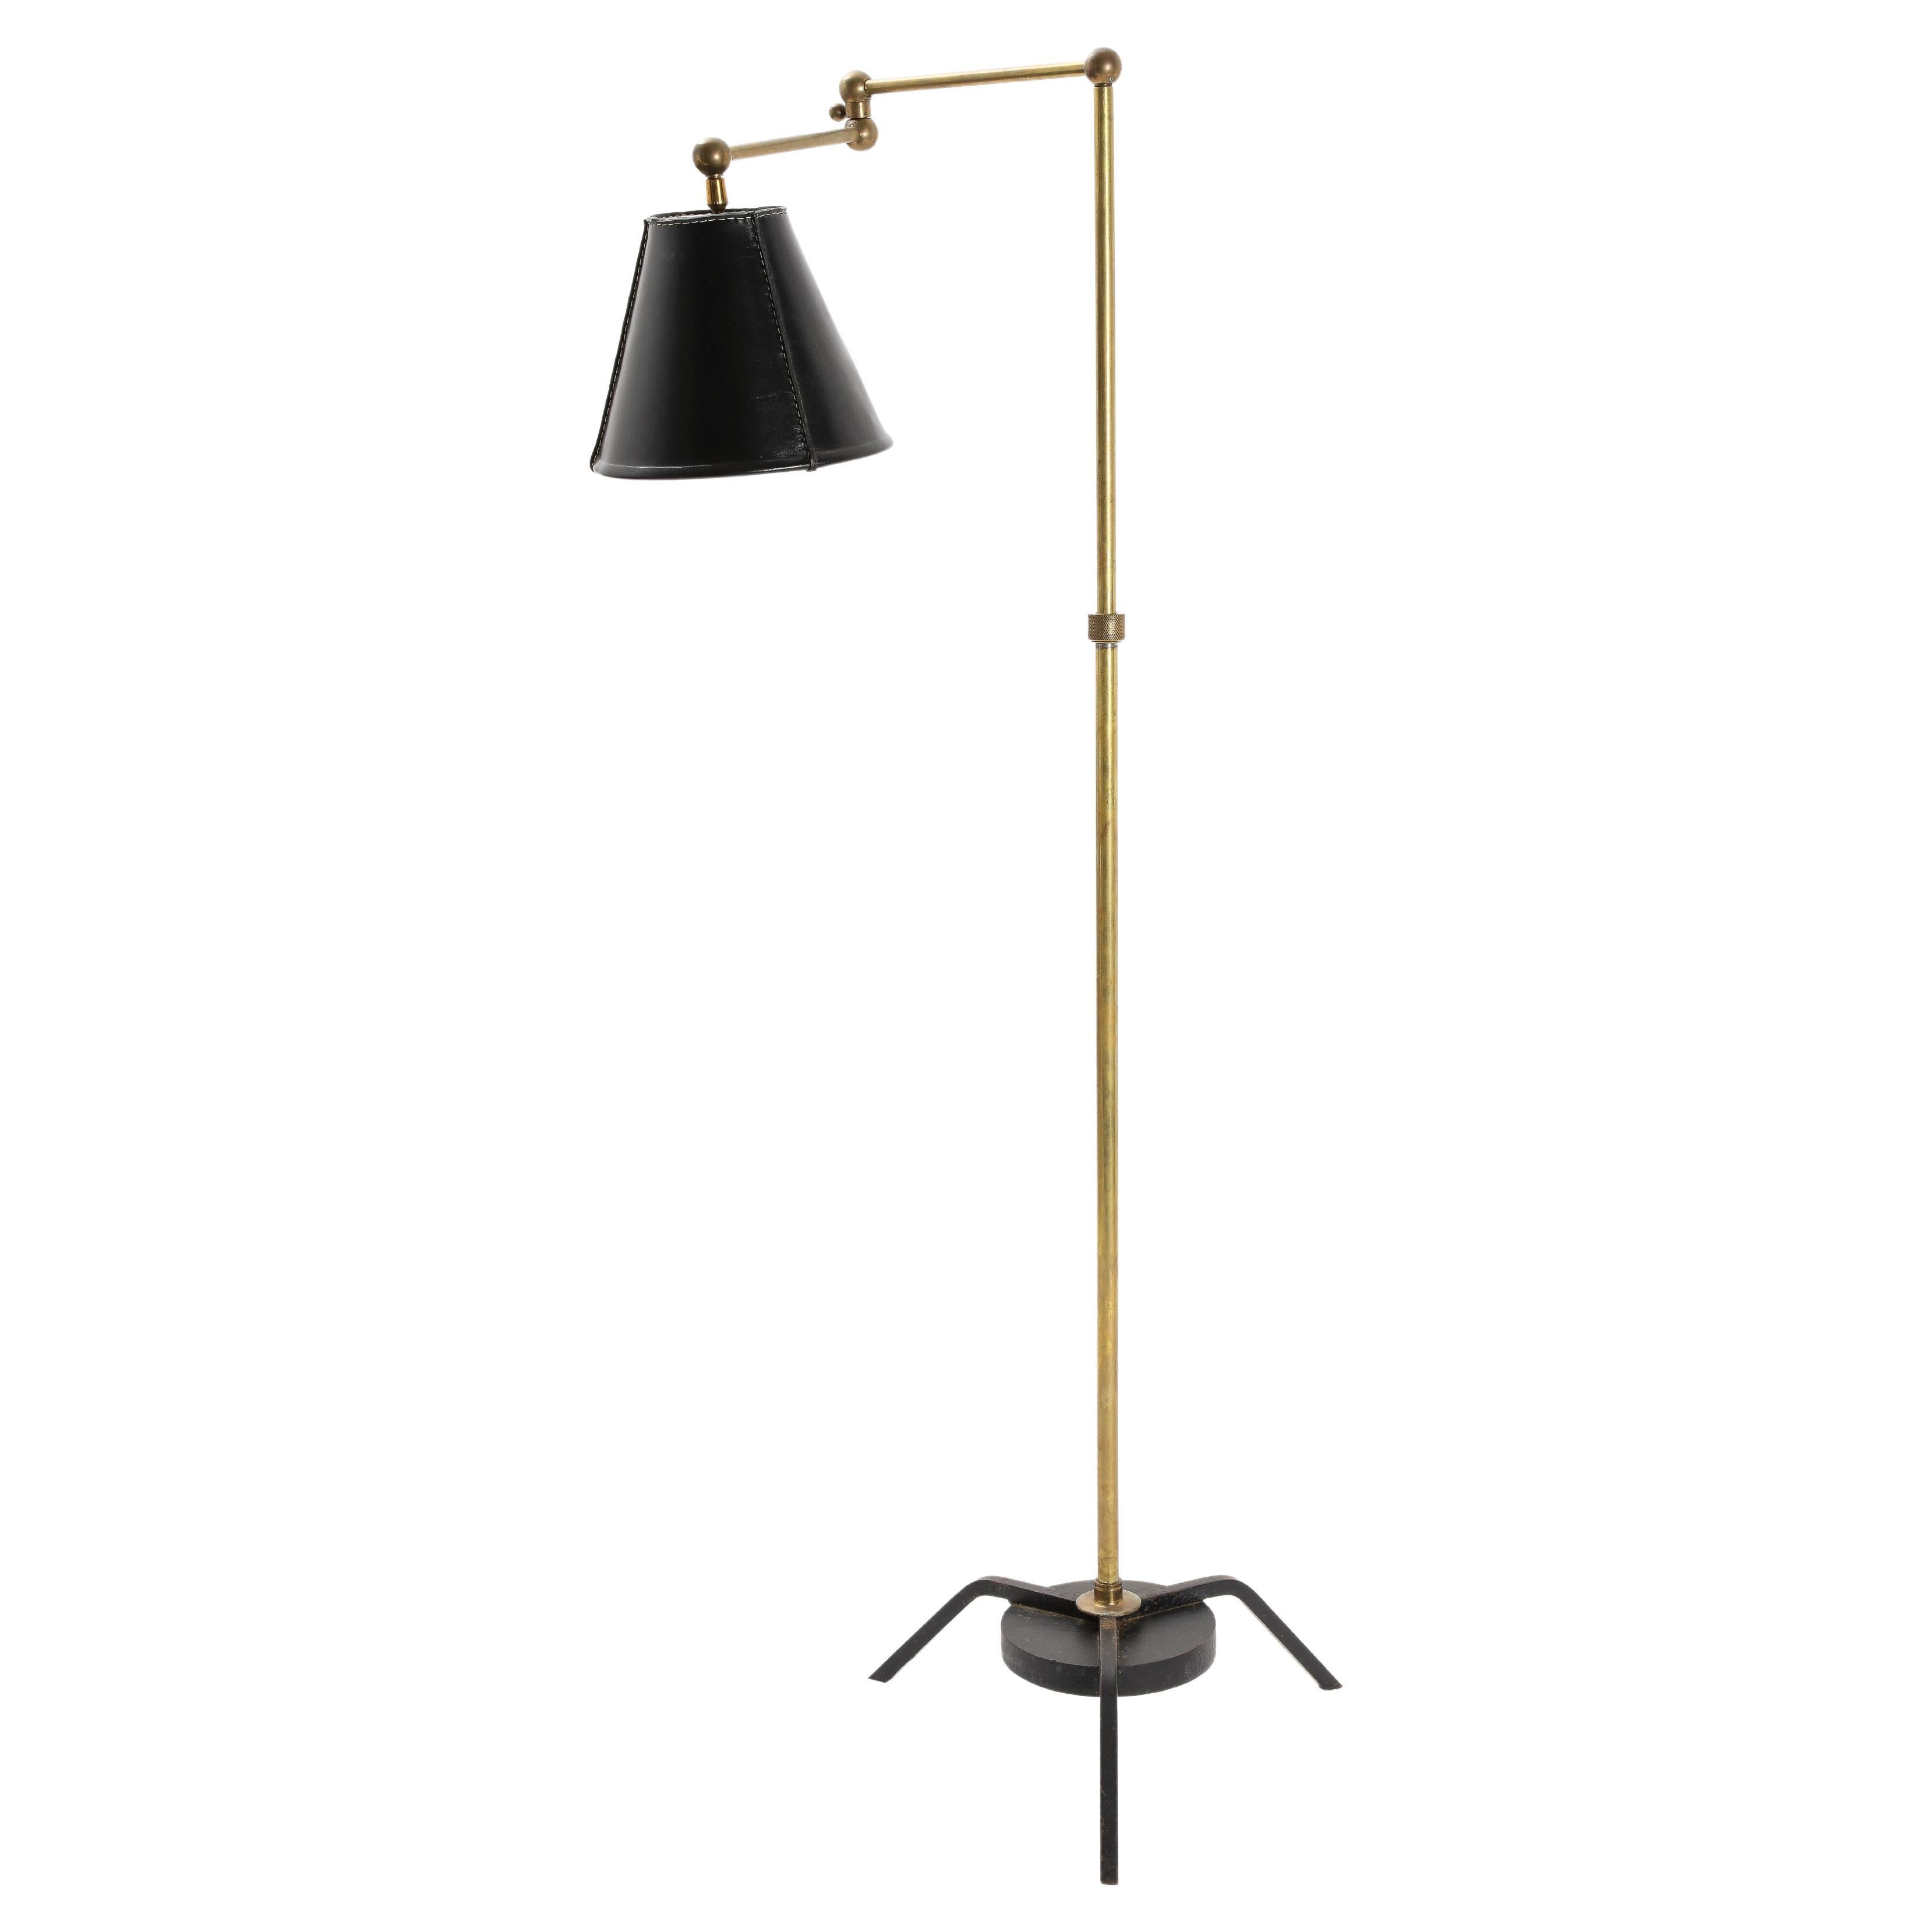 Elegant adjustable floor lamp with swinging arm and a leather lampshade.